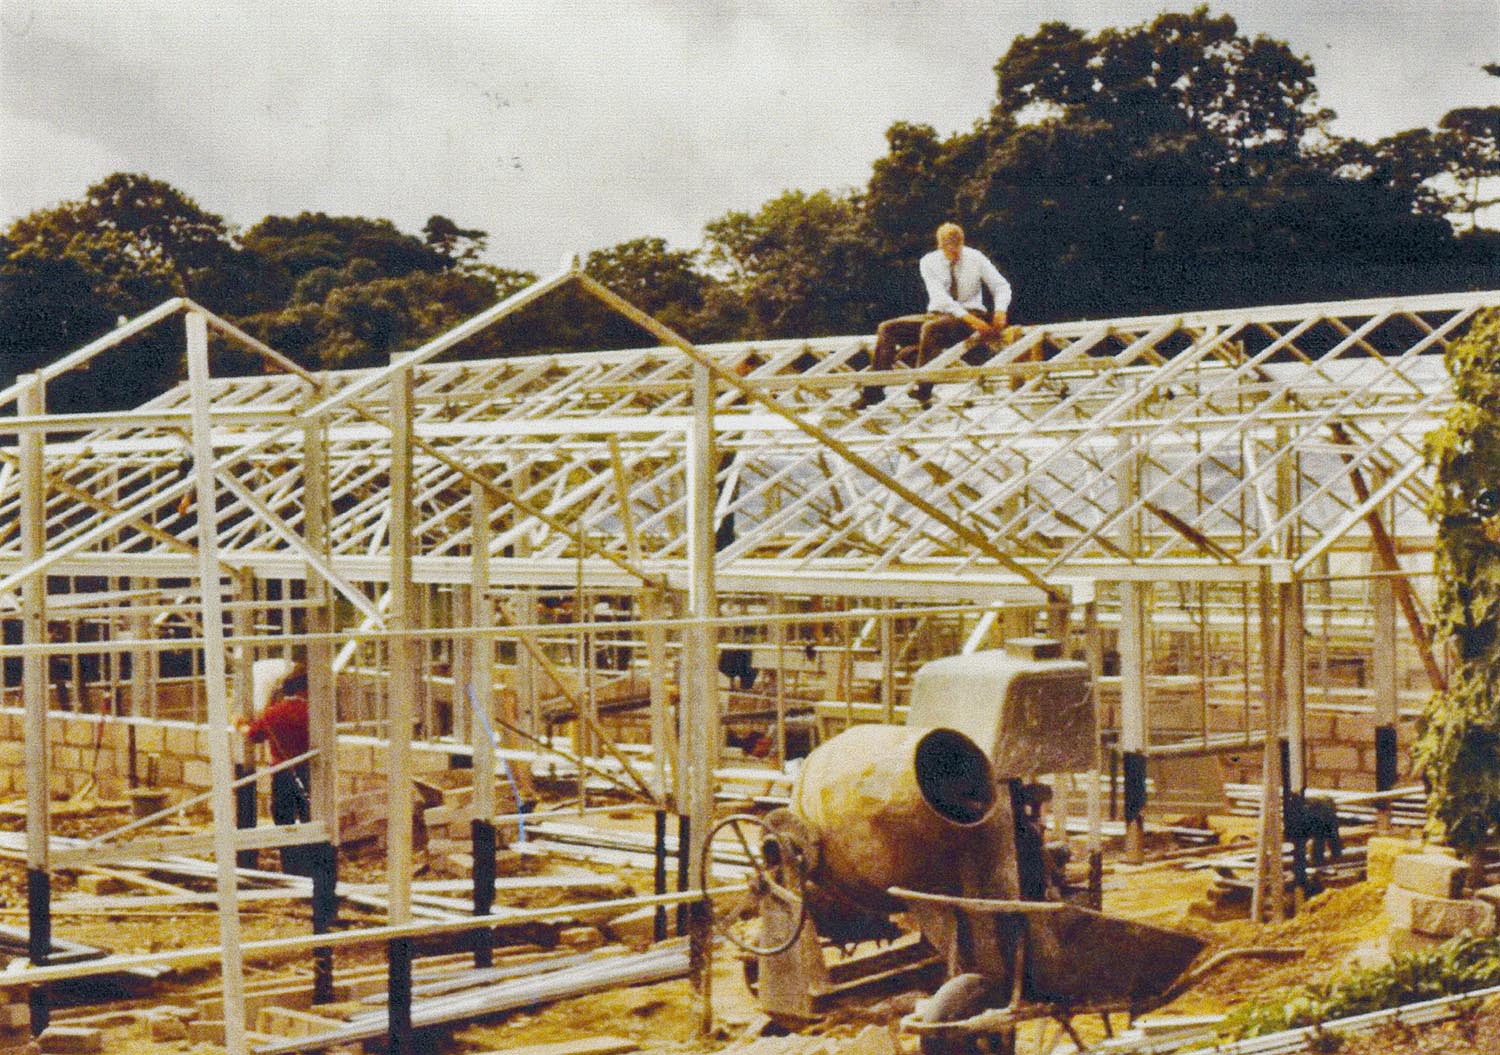 Terry Underhill building glasshouses, 1965